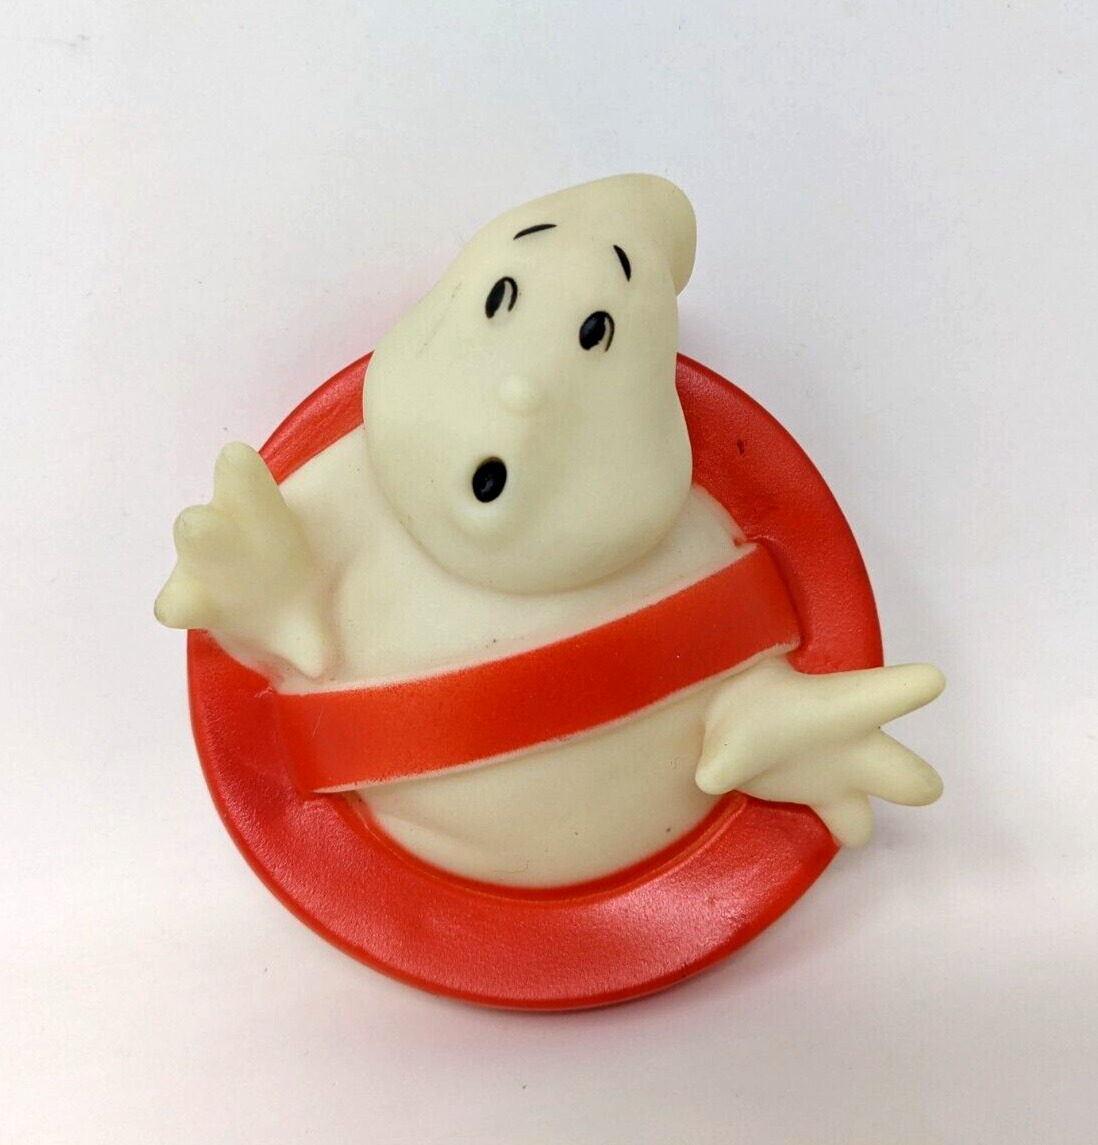 VTG 1986 Ghostbusters Logo Doorknob Cover ~ Glow in the Dark Superior Toys Rare